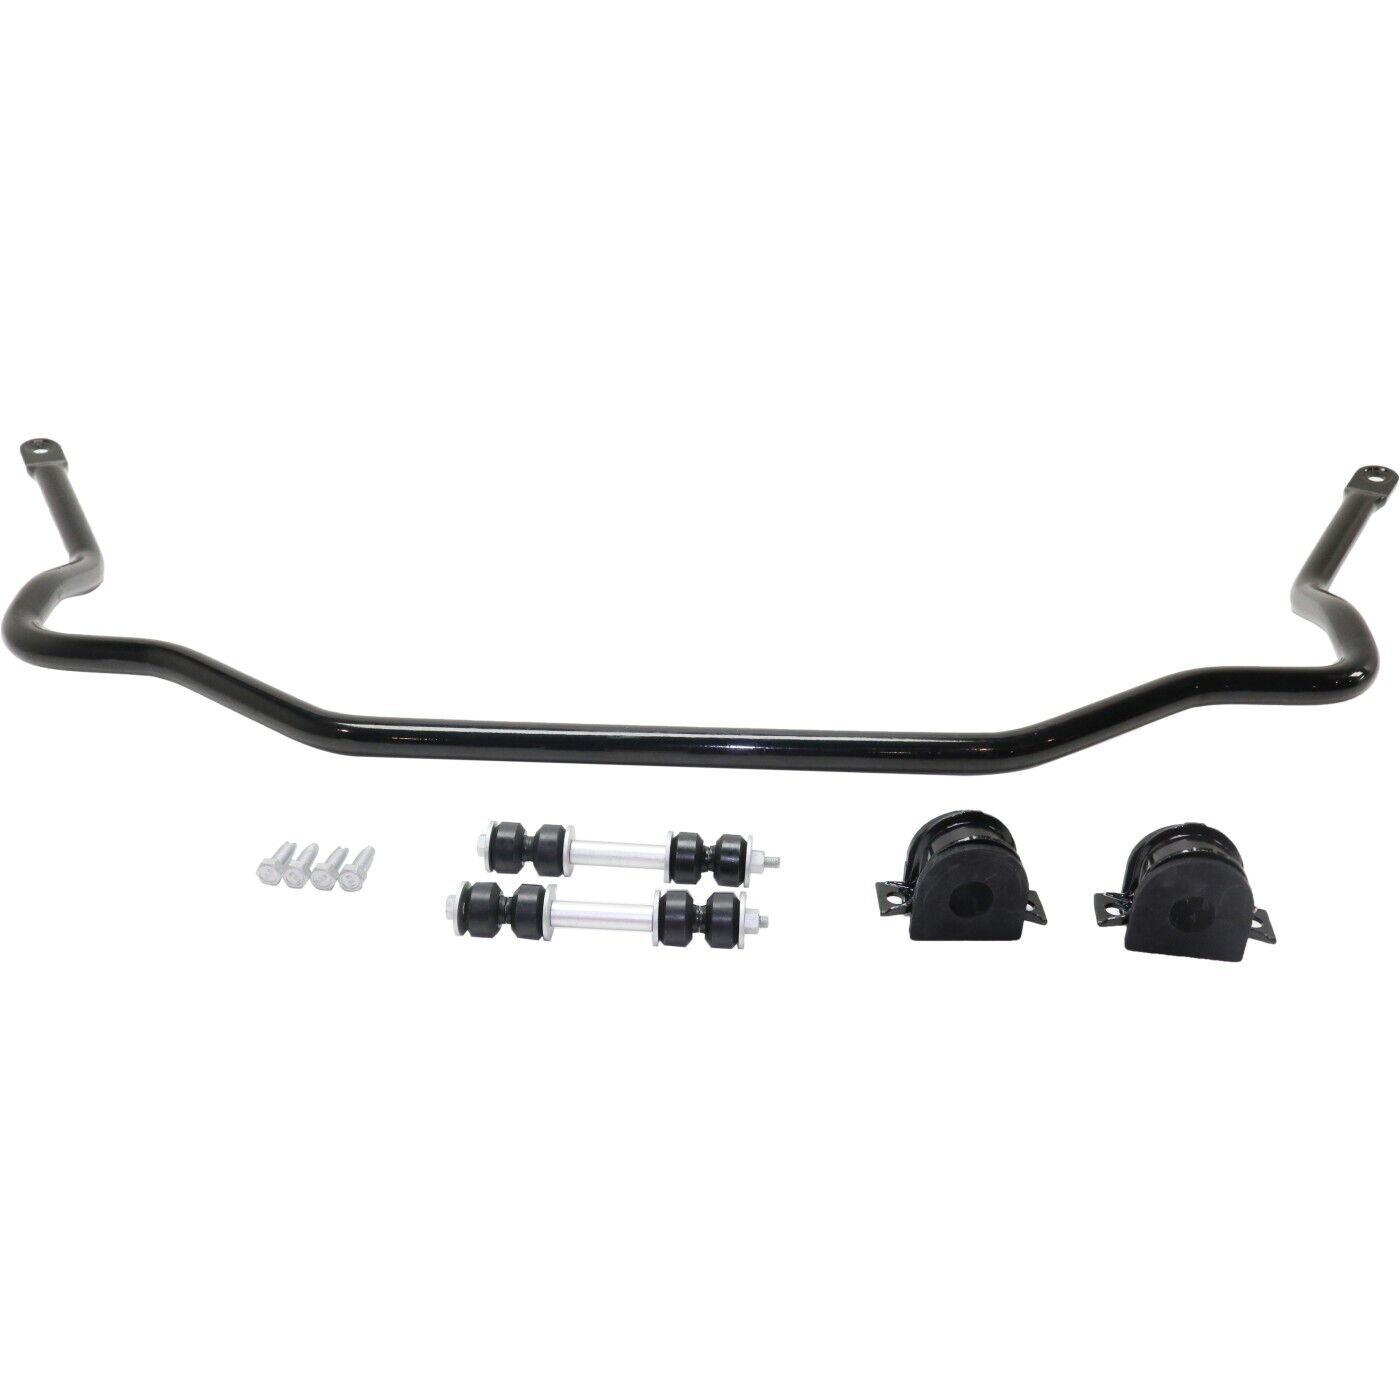 Sway Bar Kit For 1985-2005 Chevy Astro 1985-2005 GMC Safari Front